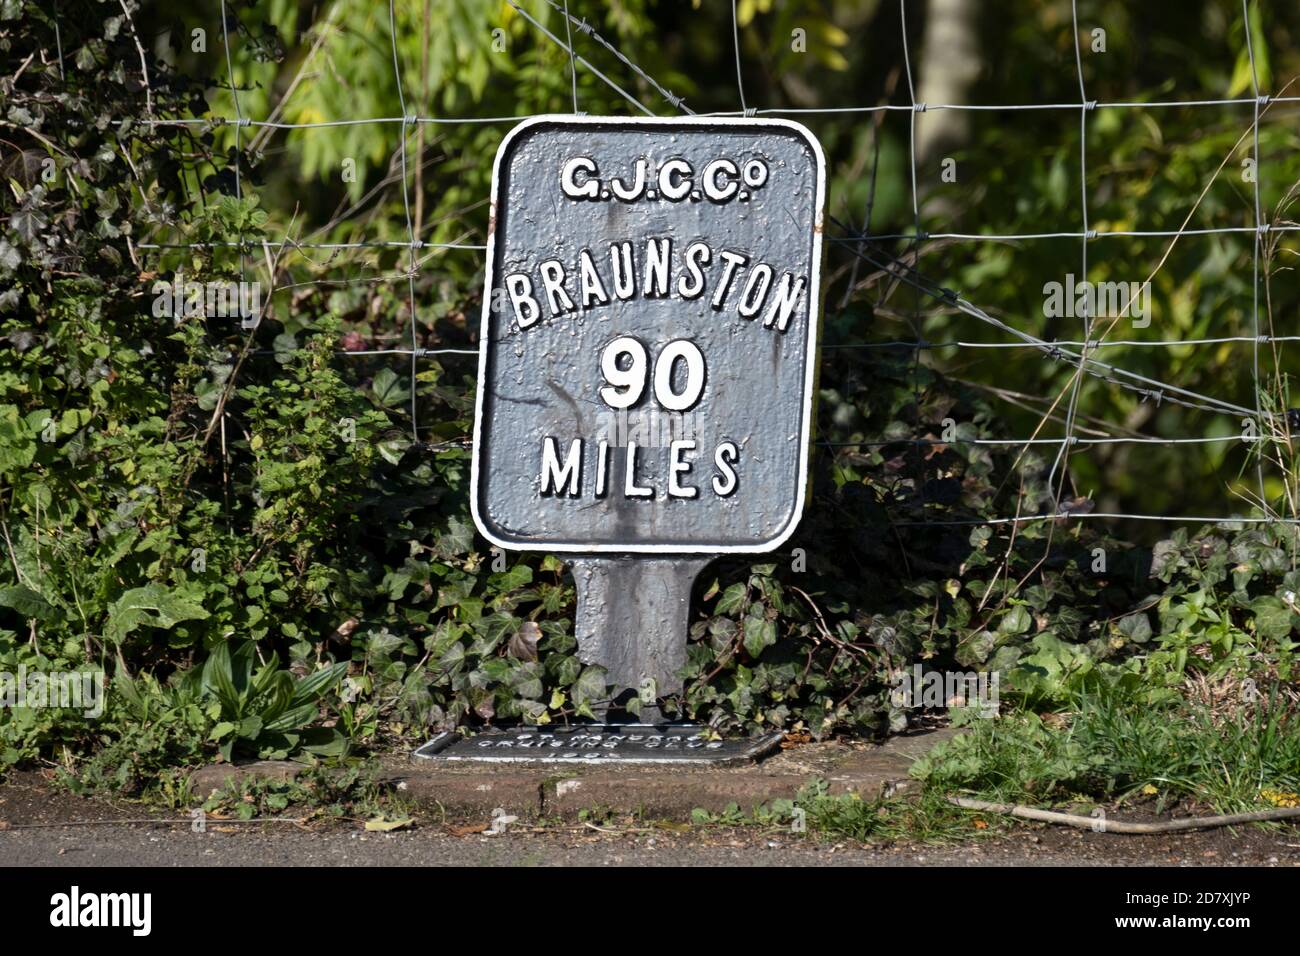 Mile Marker on the Grand Union Canal at Three Bridges in Hanwell West London showing the distance to Braunston, the centre of the canal network. Stock Photo